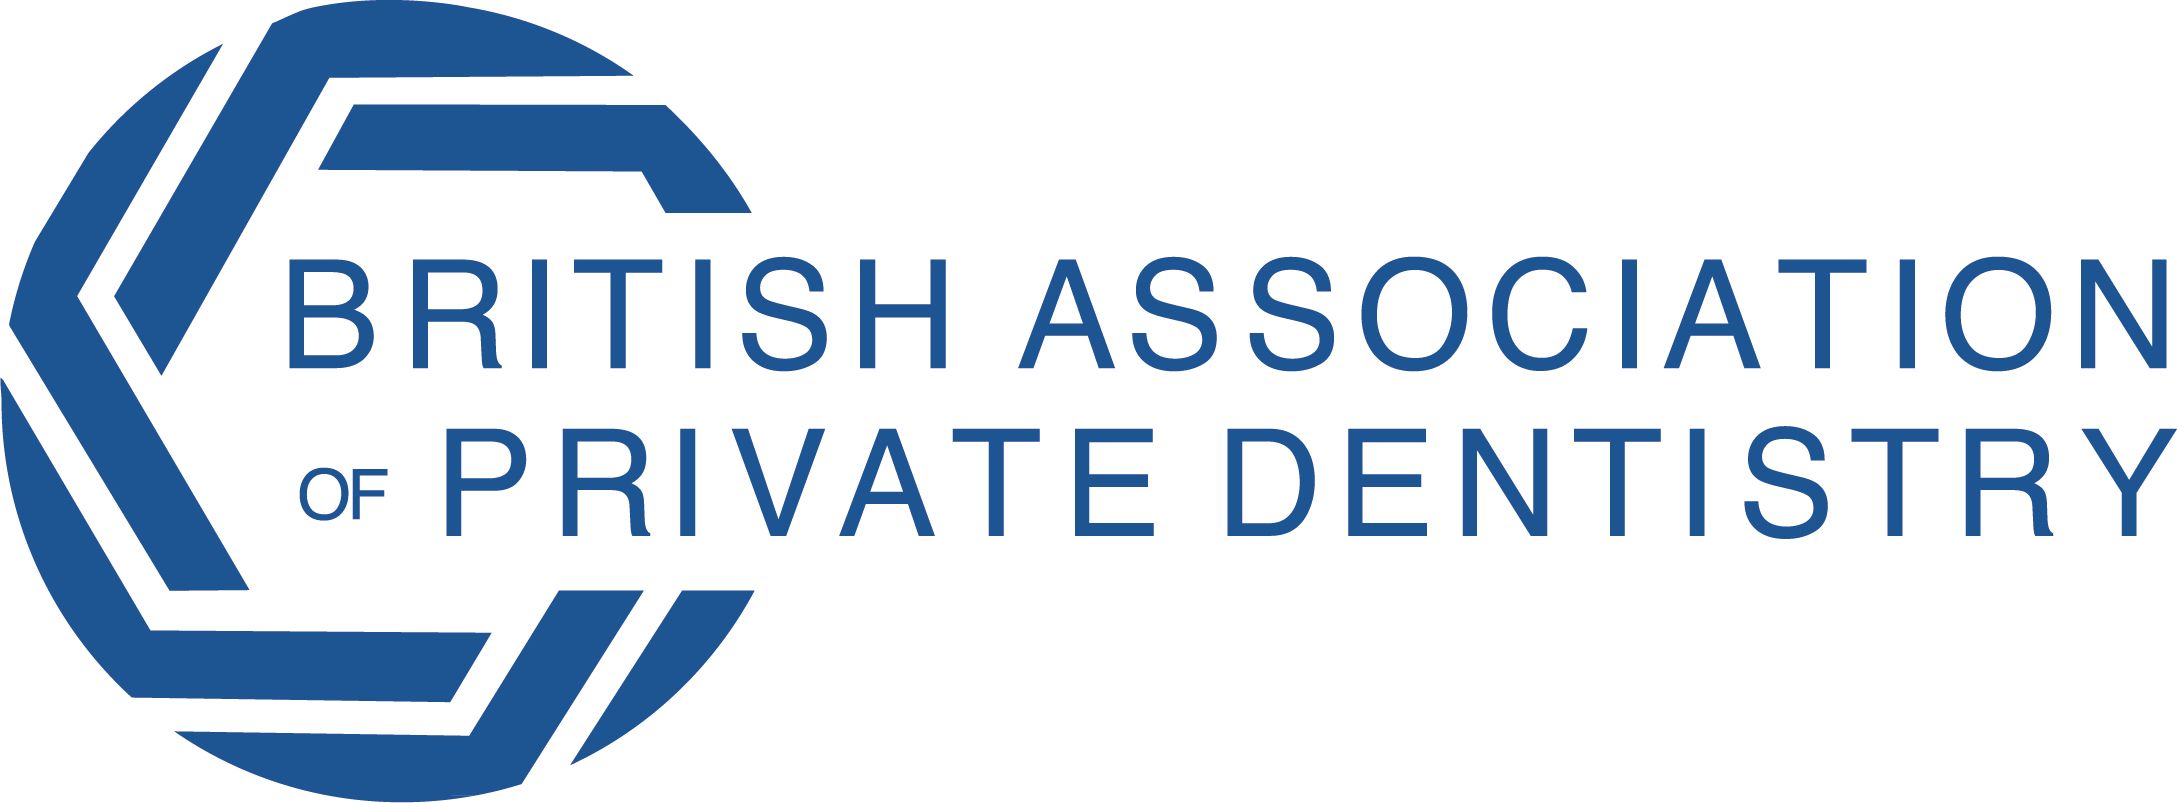 The British Association of Private Dentistry (BAPD)